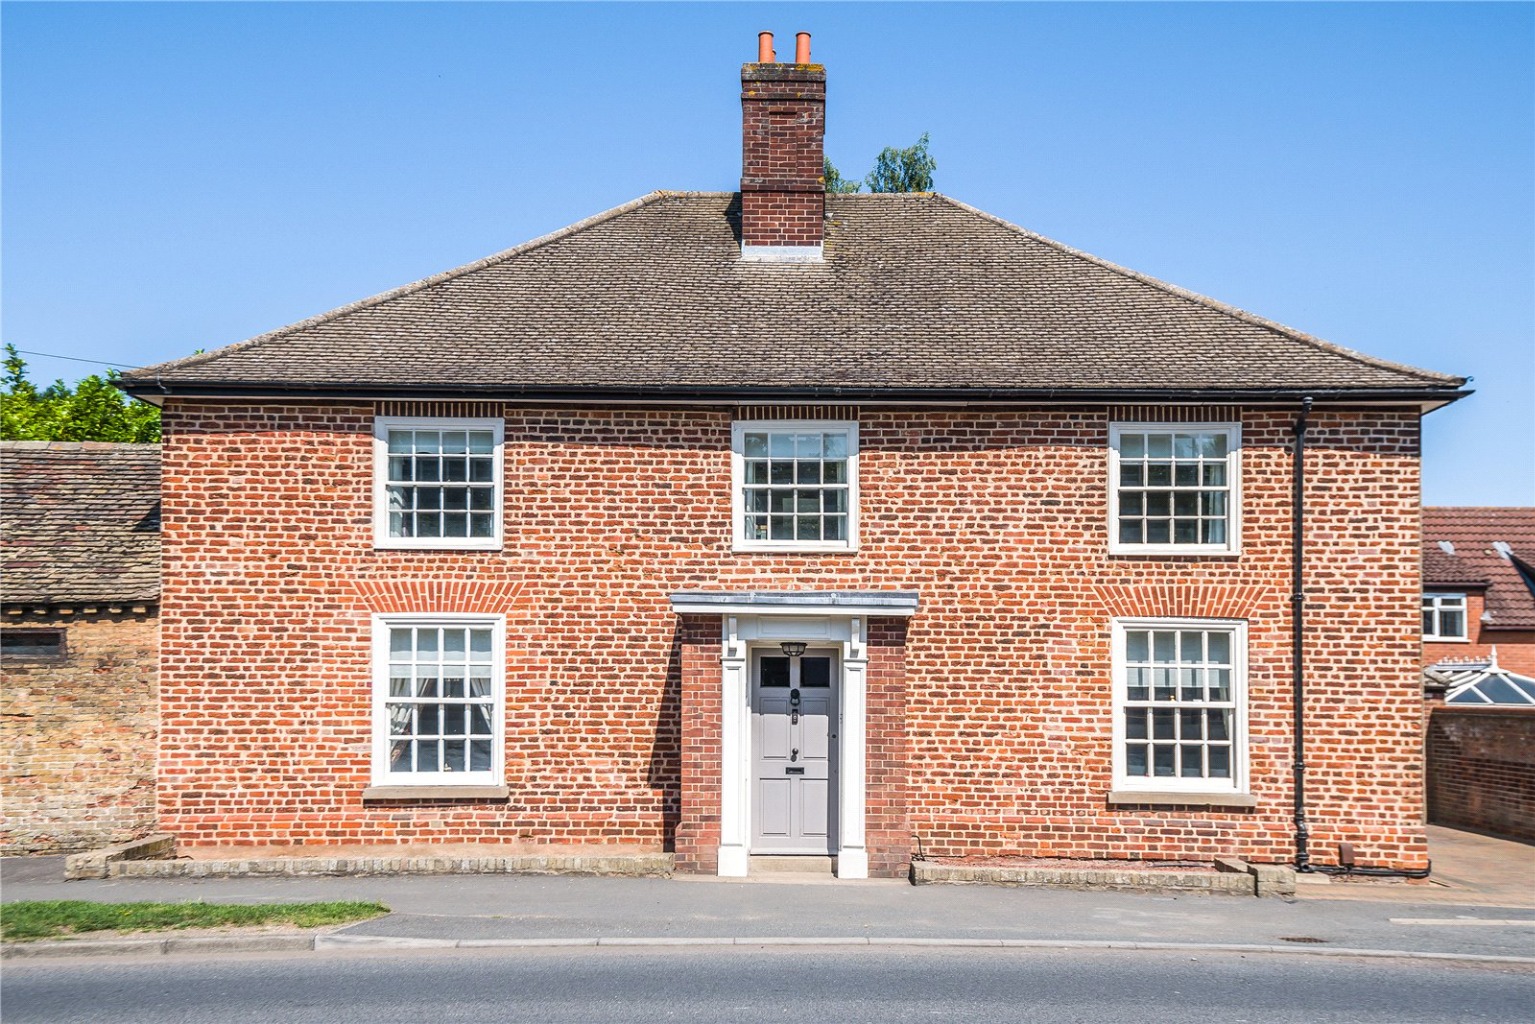 4 bed detached house for sale in Main Street, Huntingdon 18